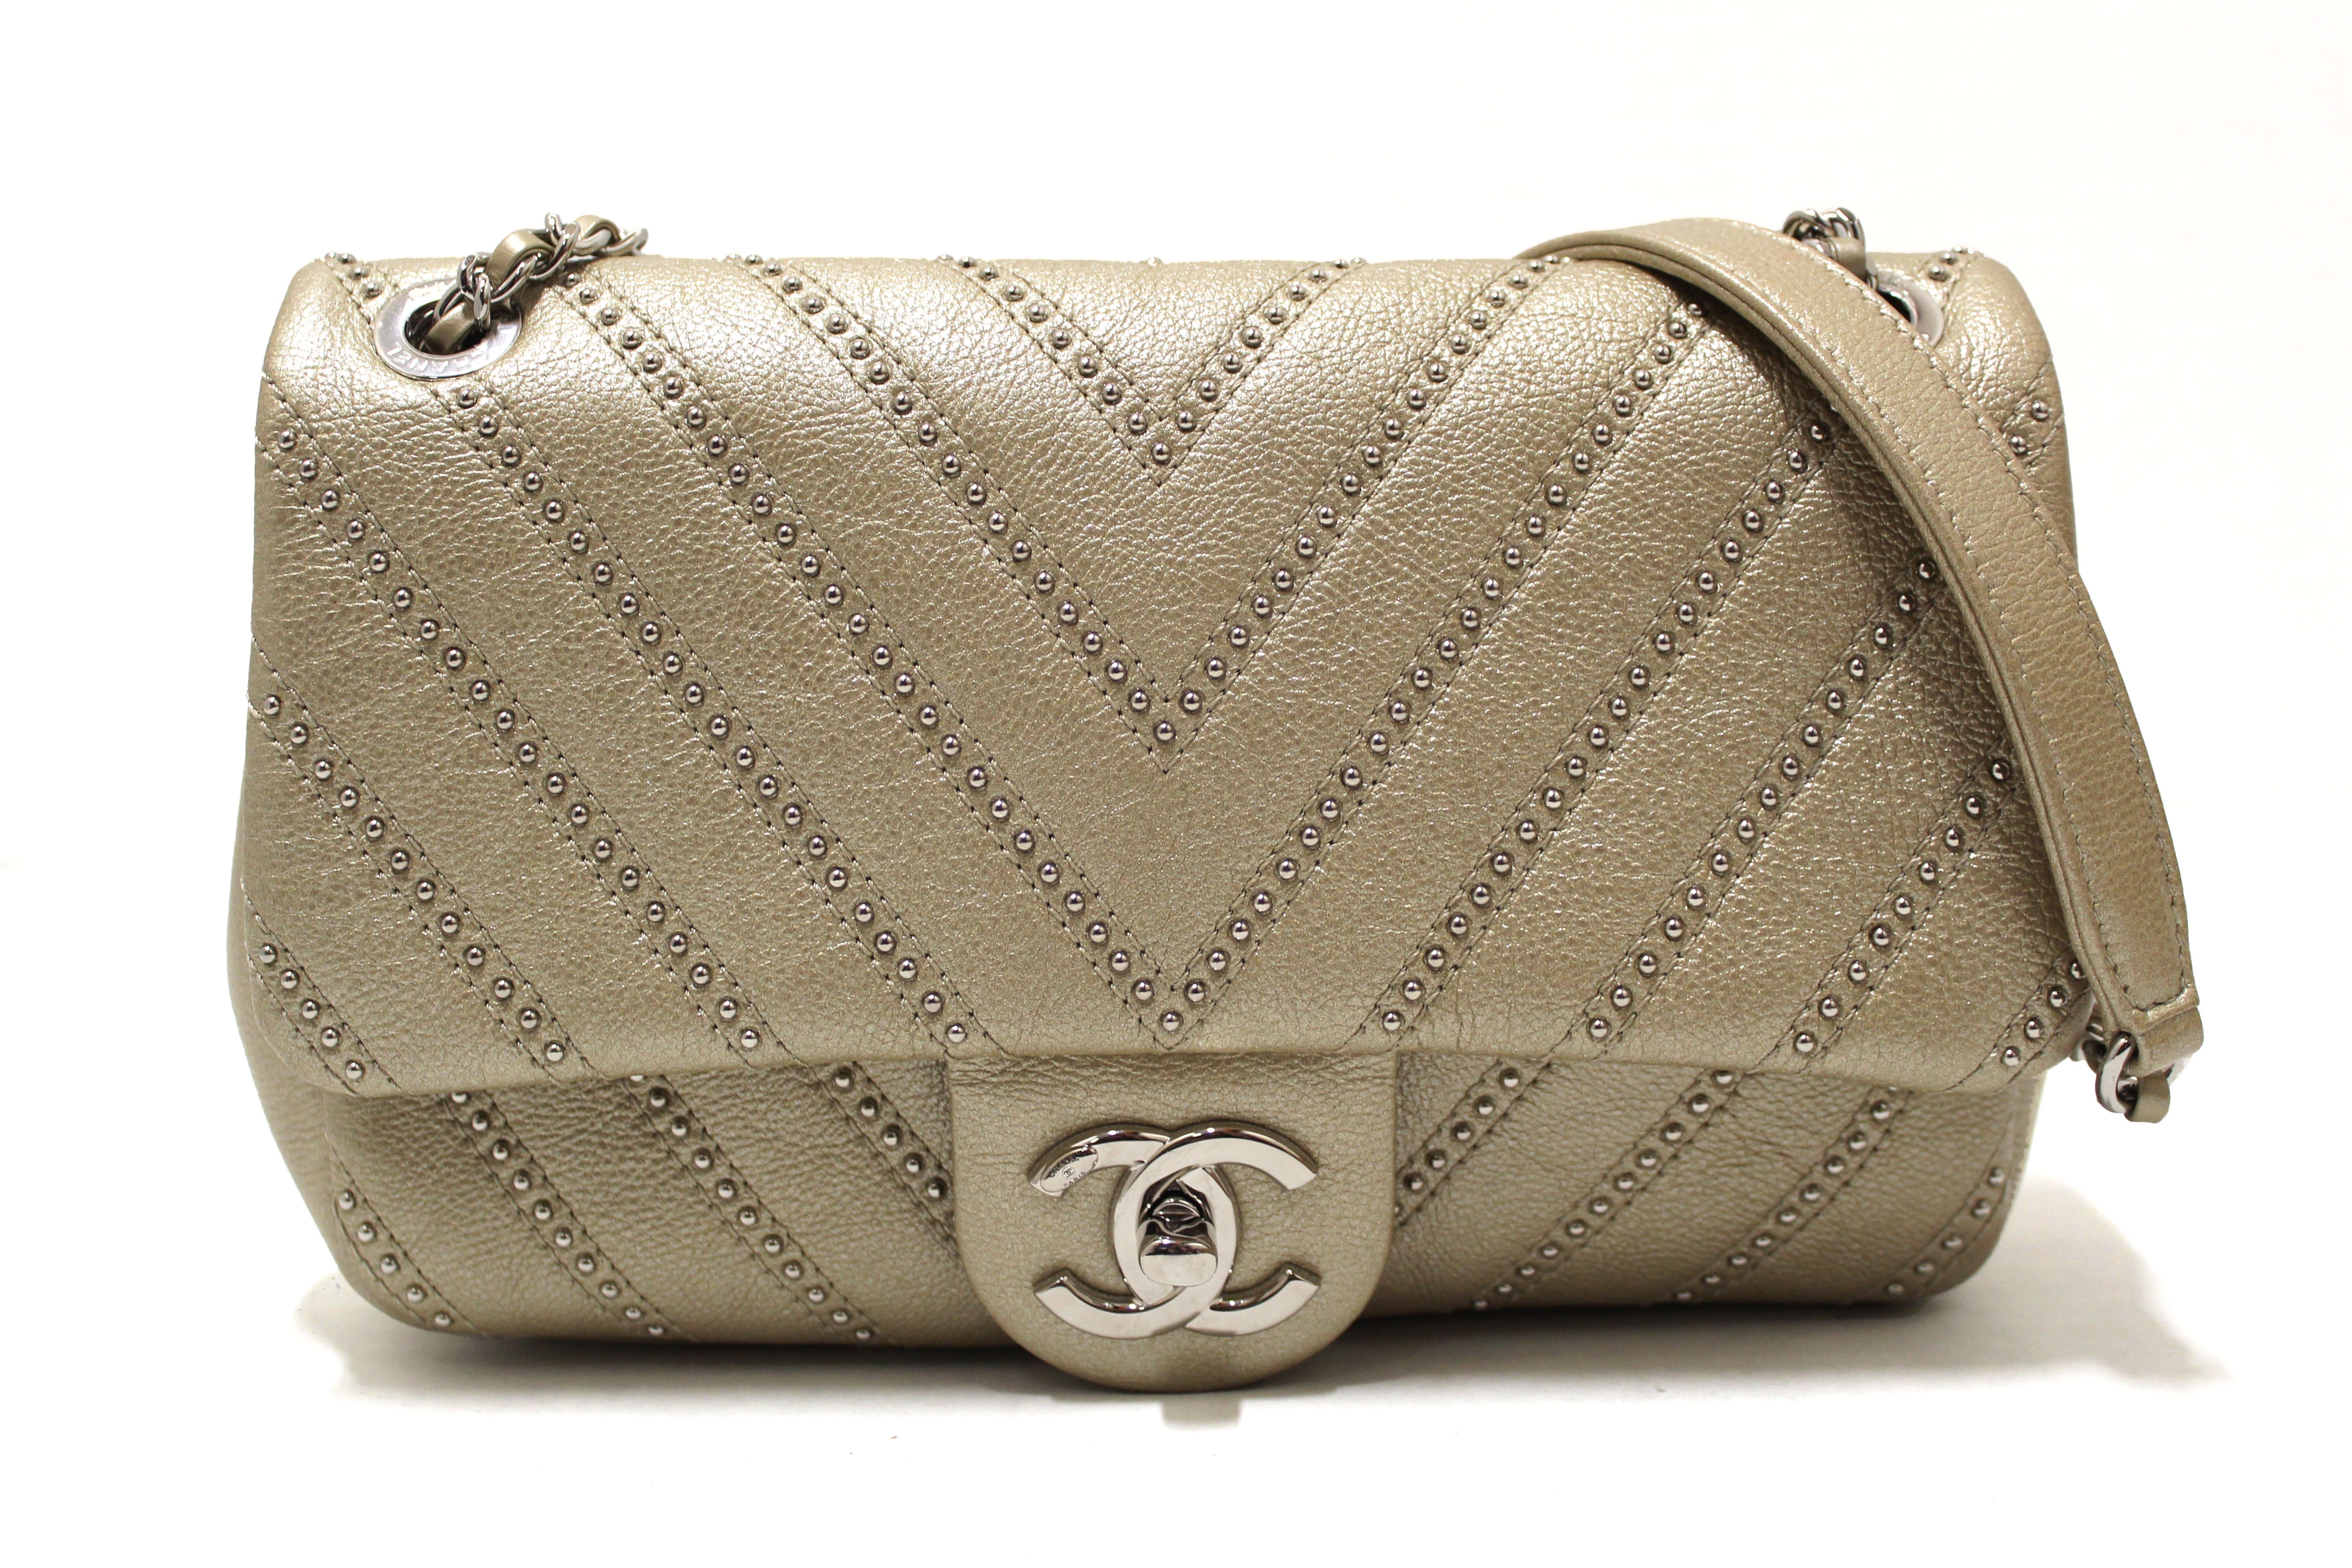 Authentic Chanel Gold Studs Calfskin Leather Mini Chevron Quilted Classic  Shoulder Bag